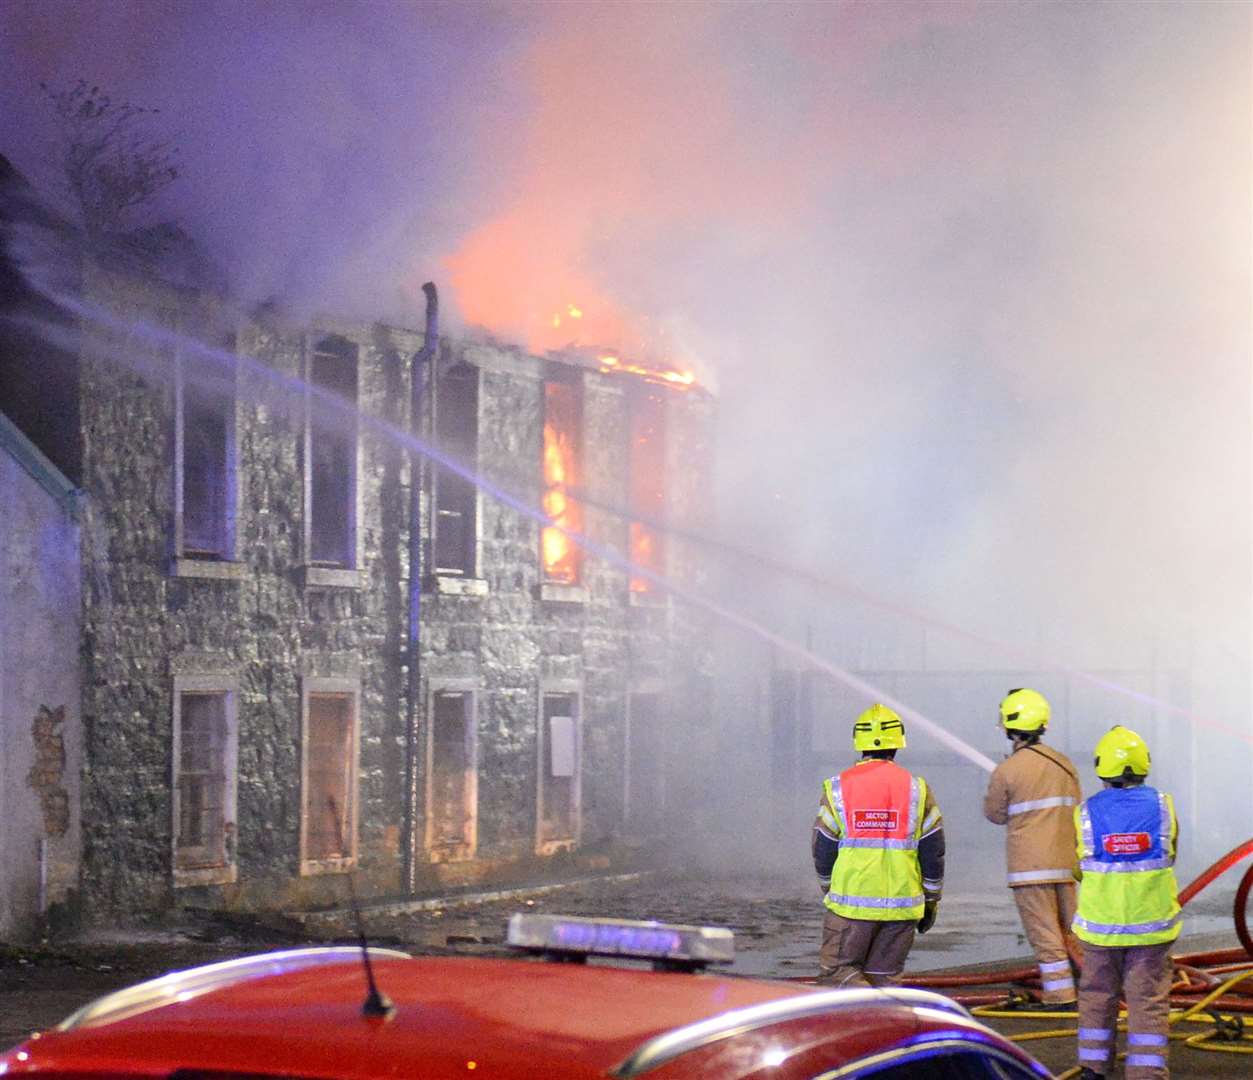 Firefighters tackle the blaze at a property in Thornbush Road. Picture: Gary Anthony